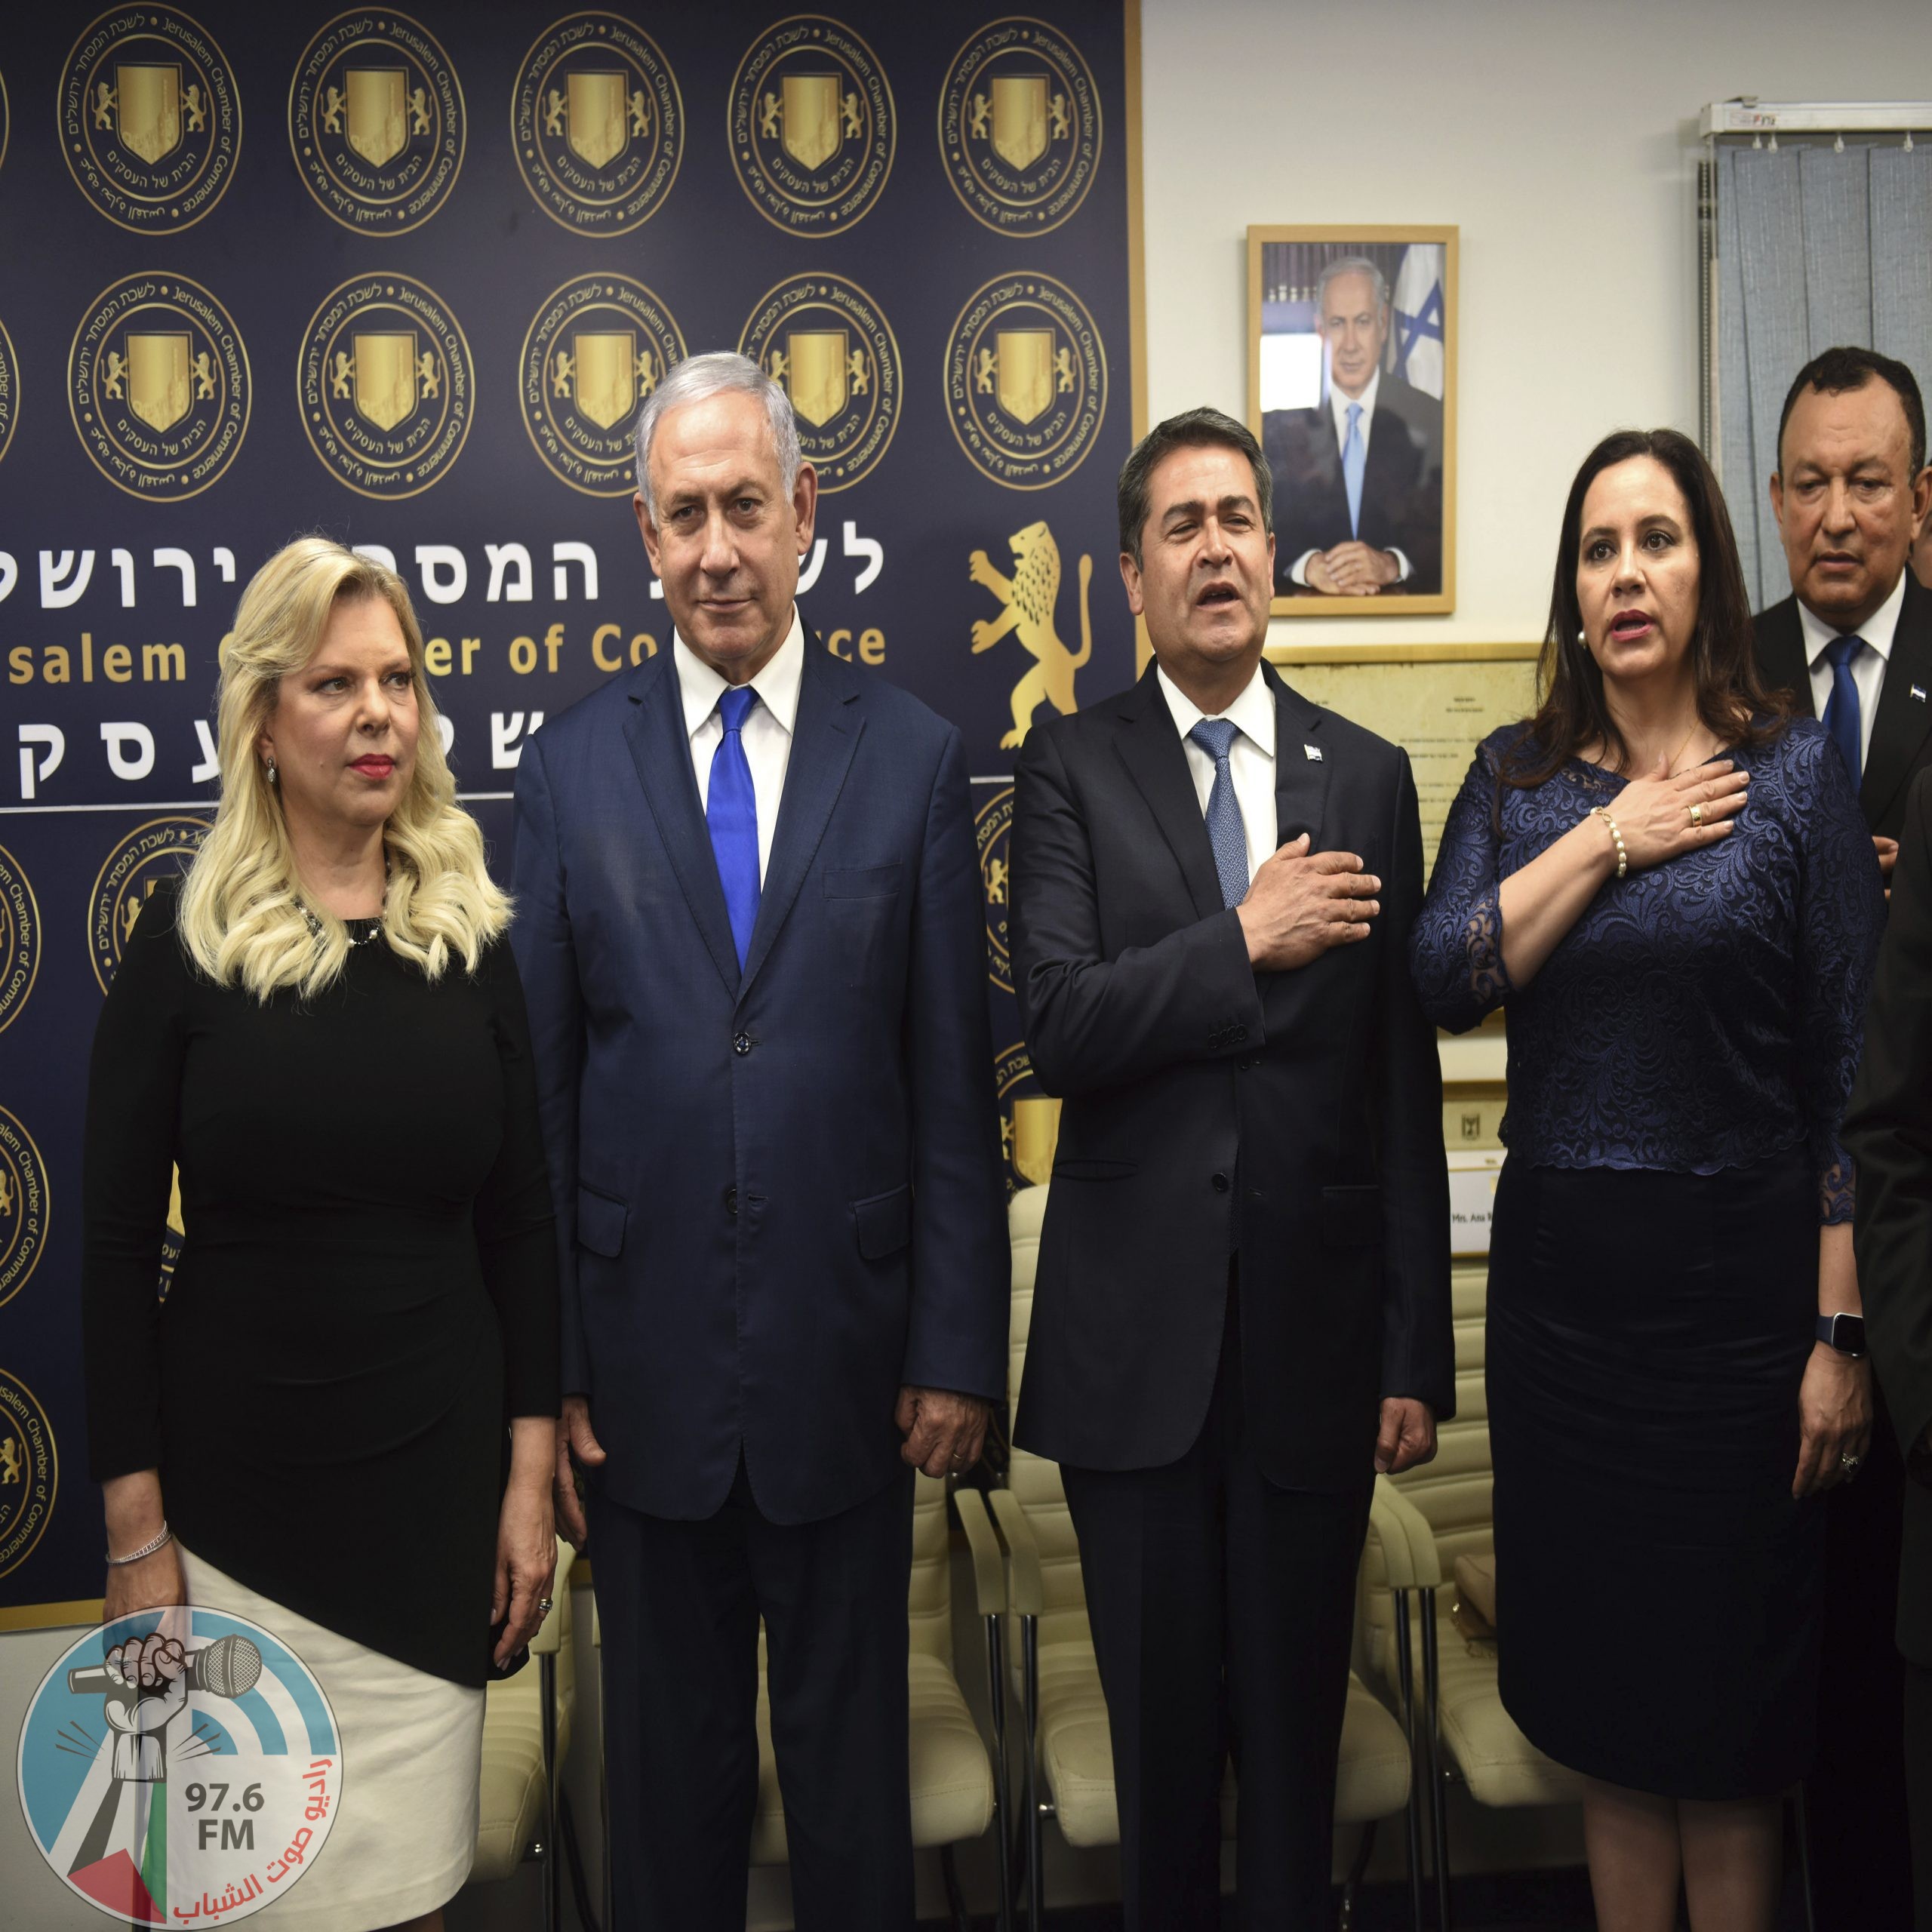 Israeli Prime Minister Benjamin Netanyahu, second left, and his wife, Sara, join the President of Honduras Juan Orlando Hernandez and his wife, Ana Garcia Carias at the inauguration ceremony of the Diplomatic Trade Office of Honduras, in Jerusalem, Sunday, Sept. 1, 2019. (Debbie Hill/Pool Photo via AP)